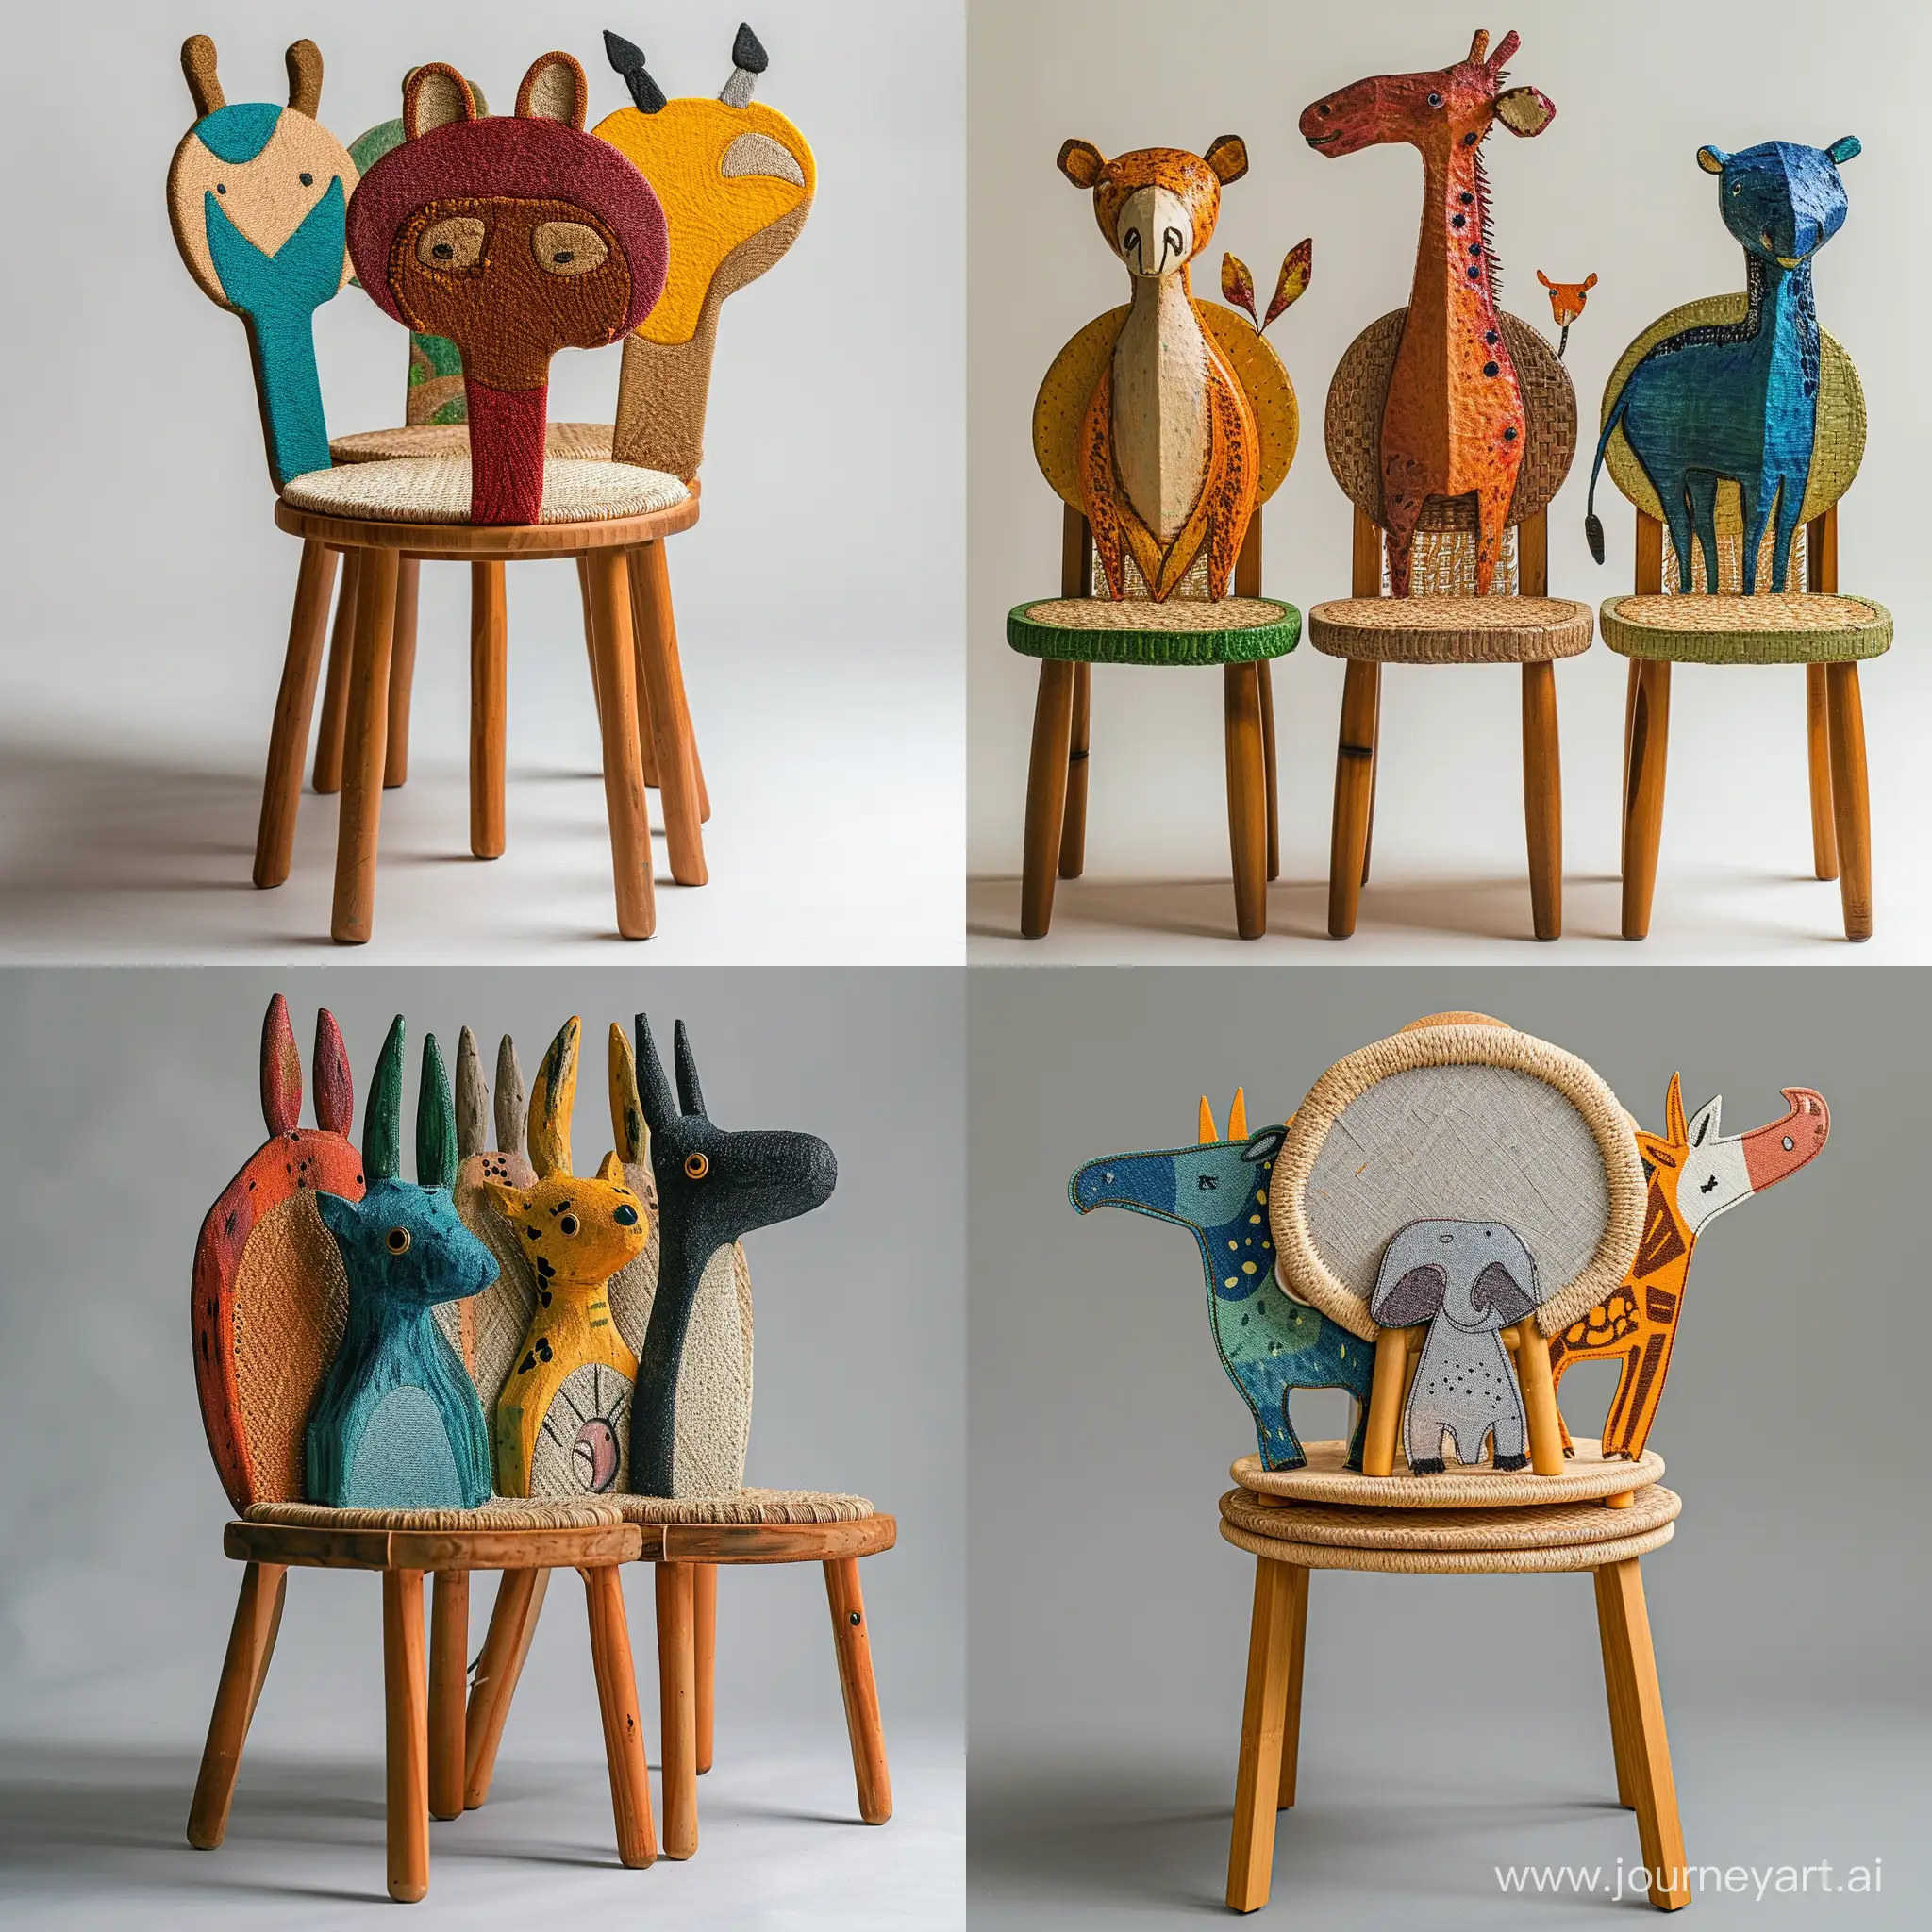 imagine an image of a  stackable sturdy children’s chair inspired by Children's Paintings of Animals Safari, with backrests shaped like different creatures. Use recycled wood for the frame and woven plant fibers for seating areas, depicted in colors representative of the chosen animals. The seat should stand approximately 30cm tall, built to educate about wildlife and ensure durability.realistic style